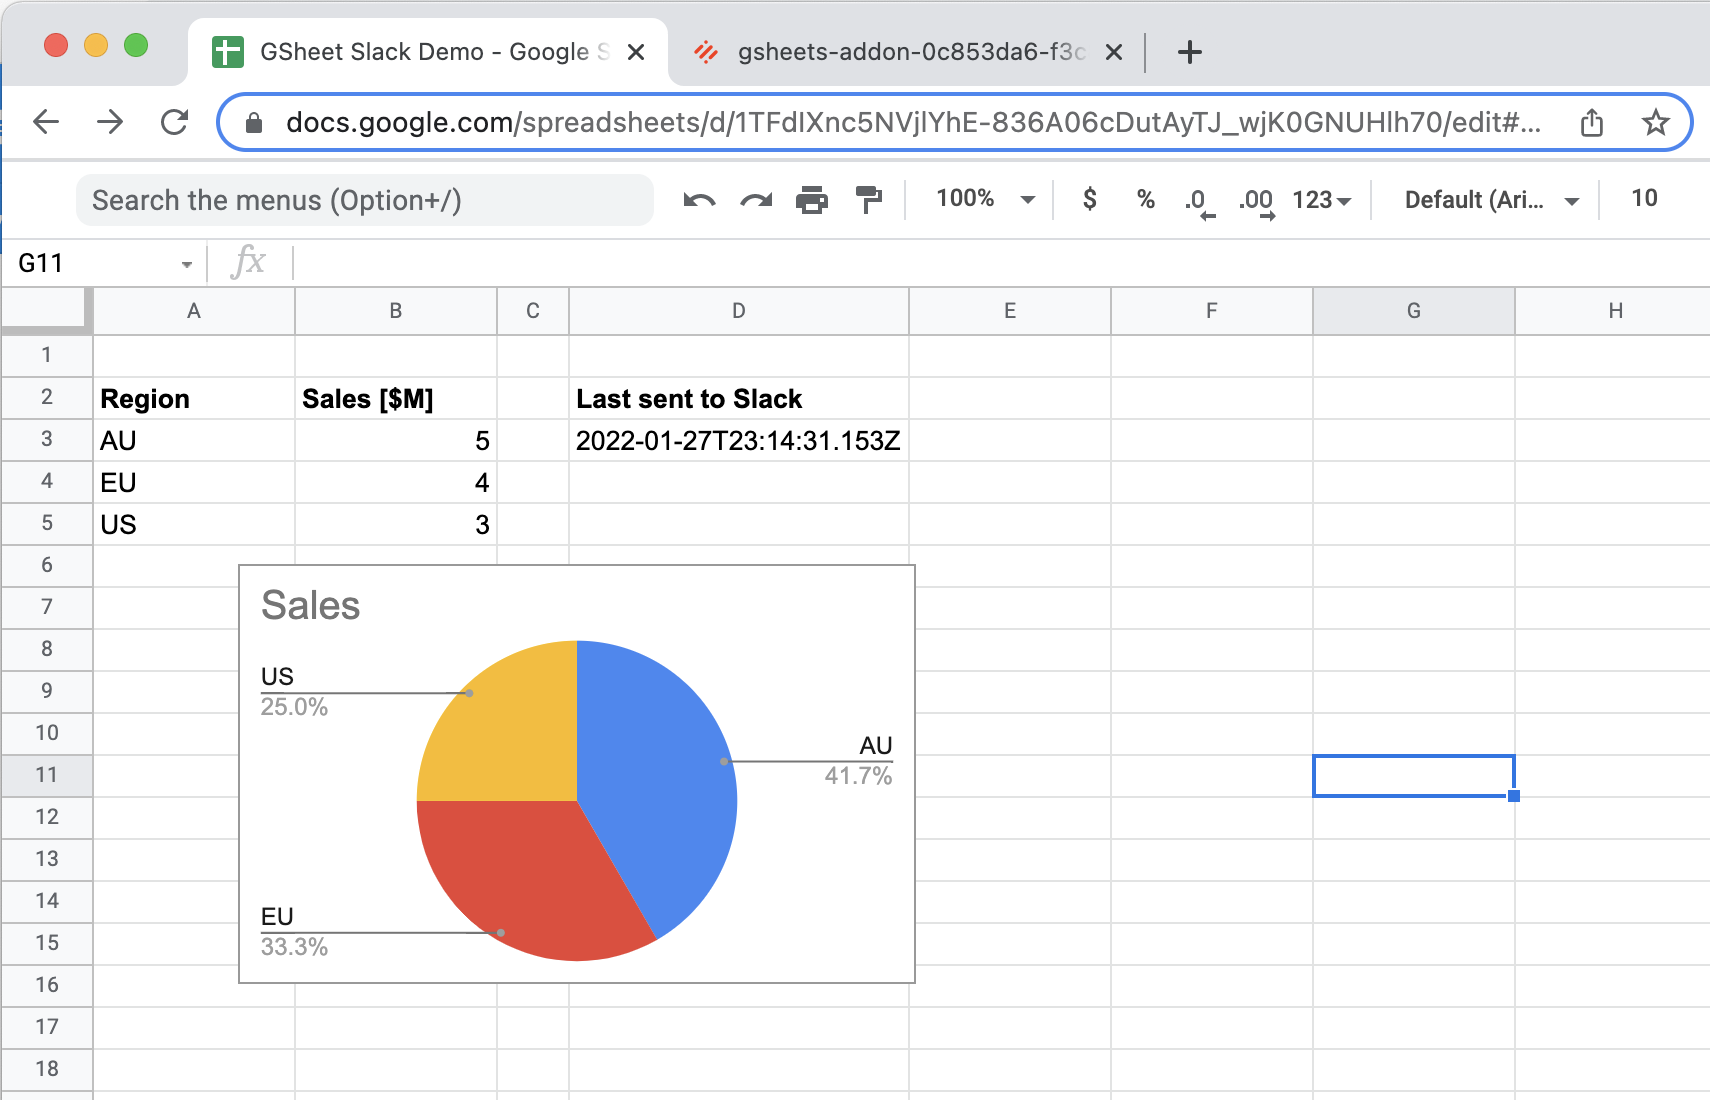 Add simple pie chart with sales data. Set "Sales" as title!